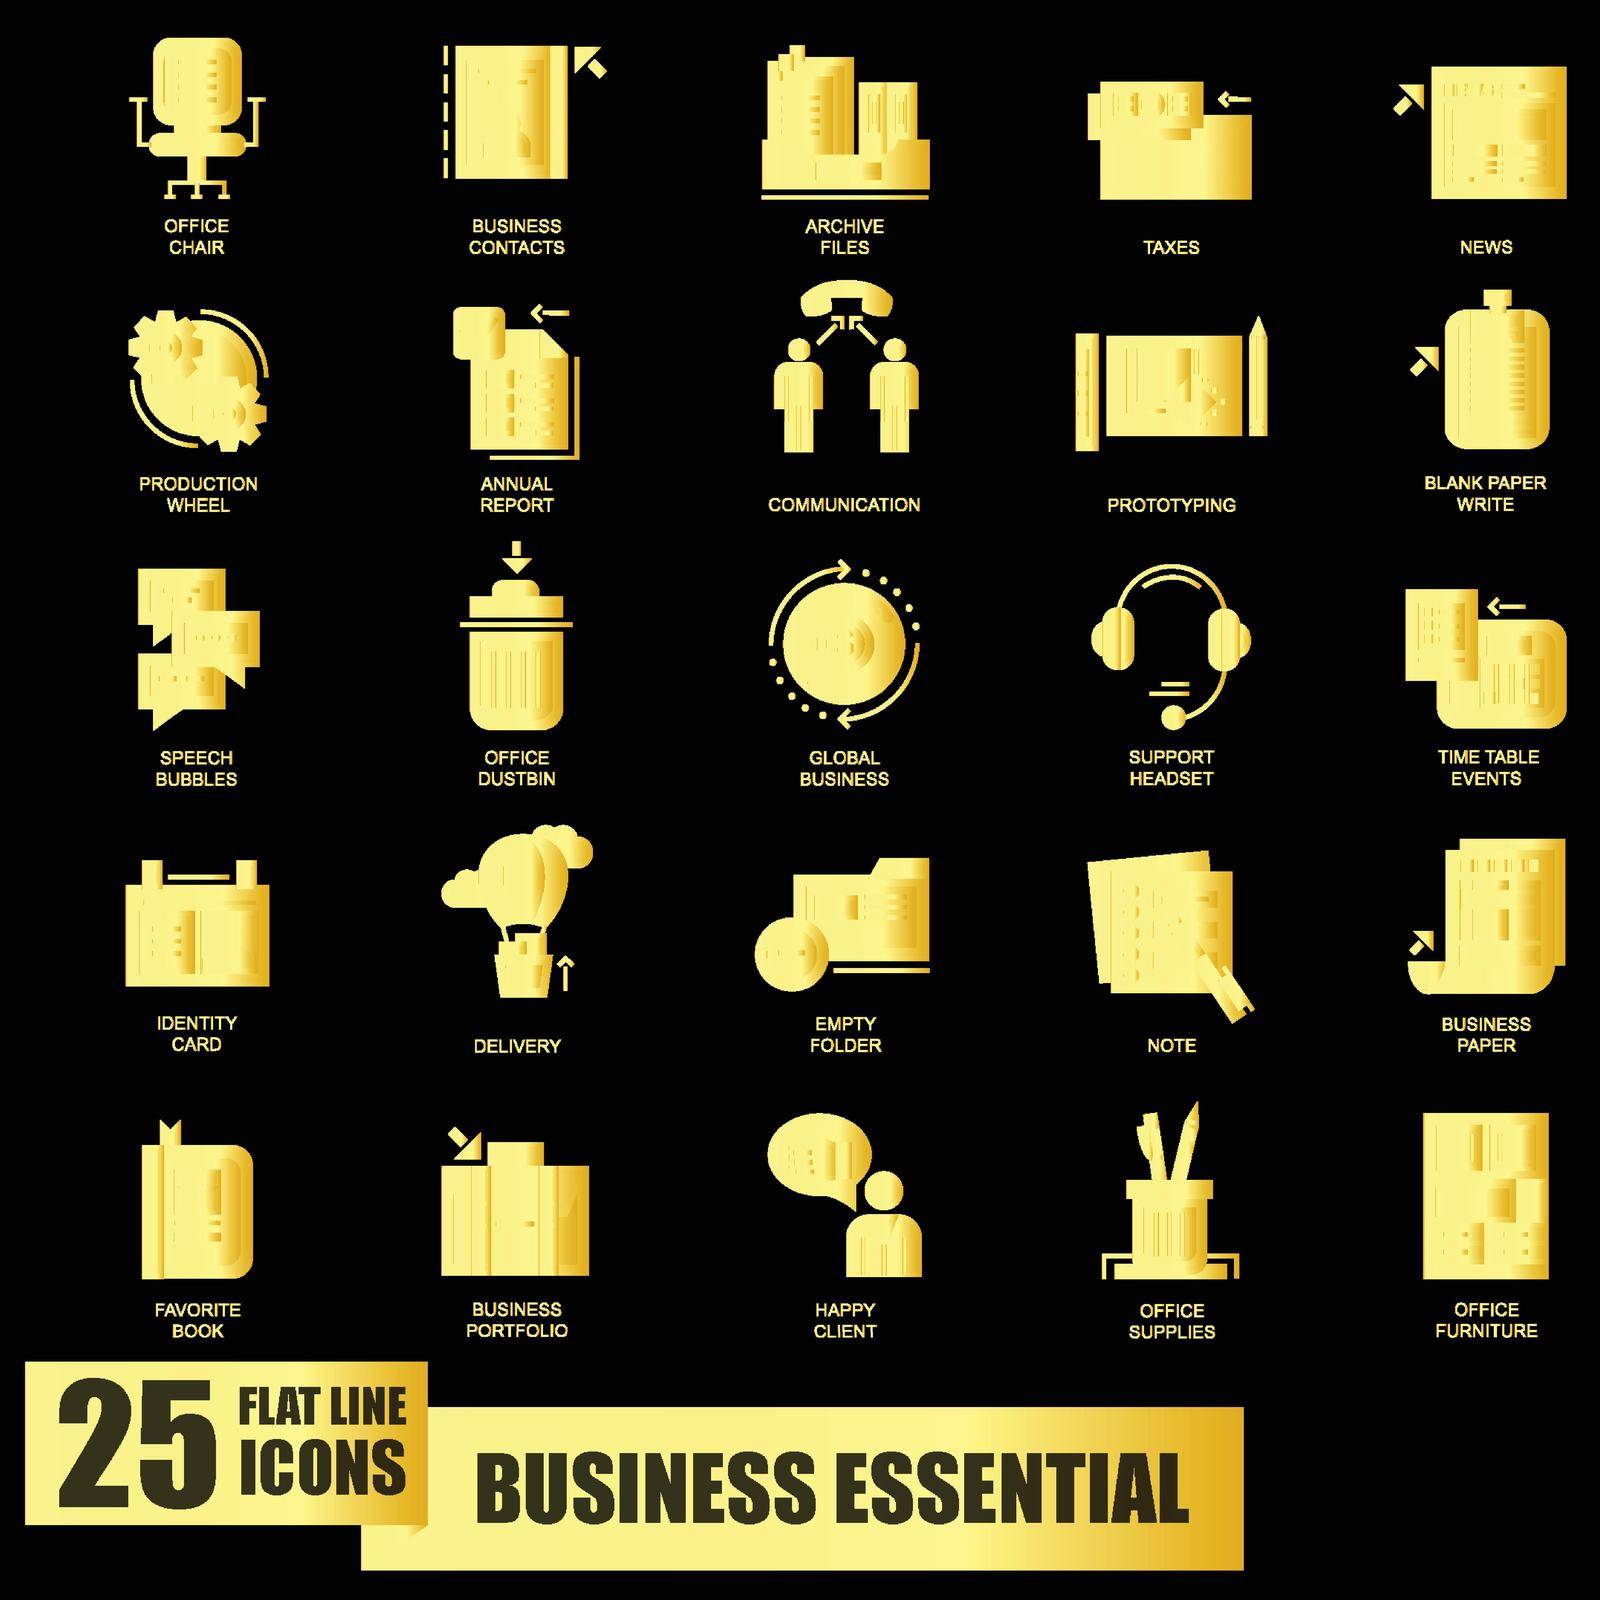 you can use Gold business essential icon collection vector to design banners, posters, backgrounds, ...etc.